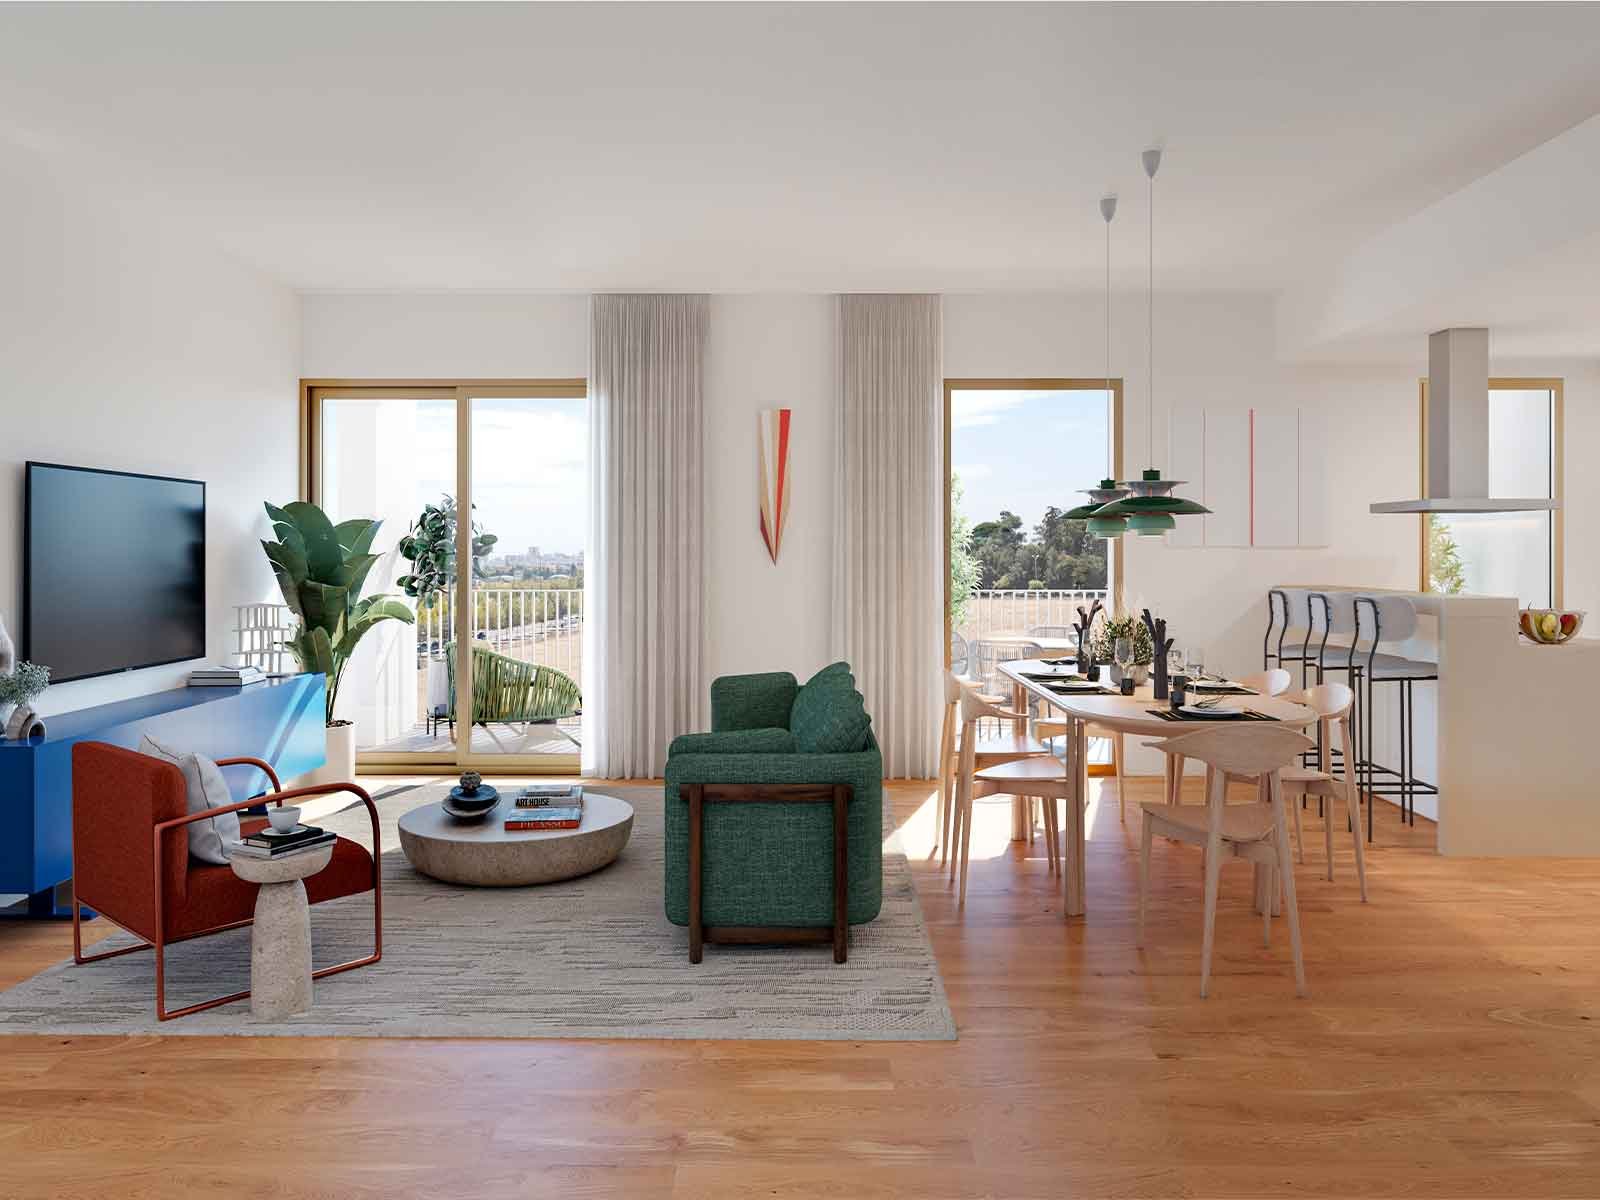 3 bedroom apartment with balcony and parking in new development, Lisbon 1852777839